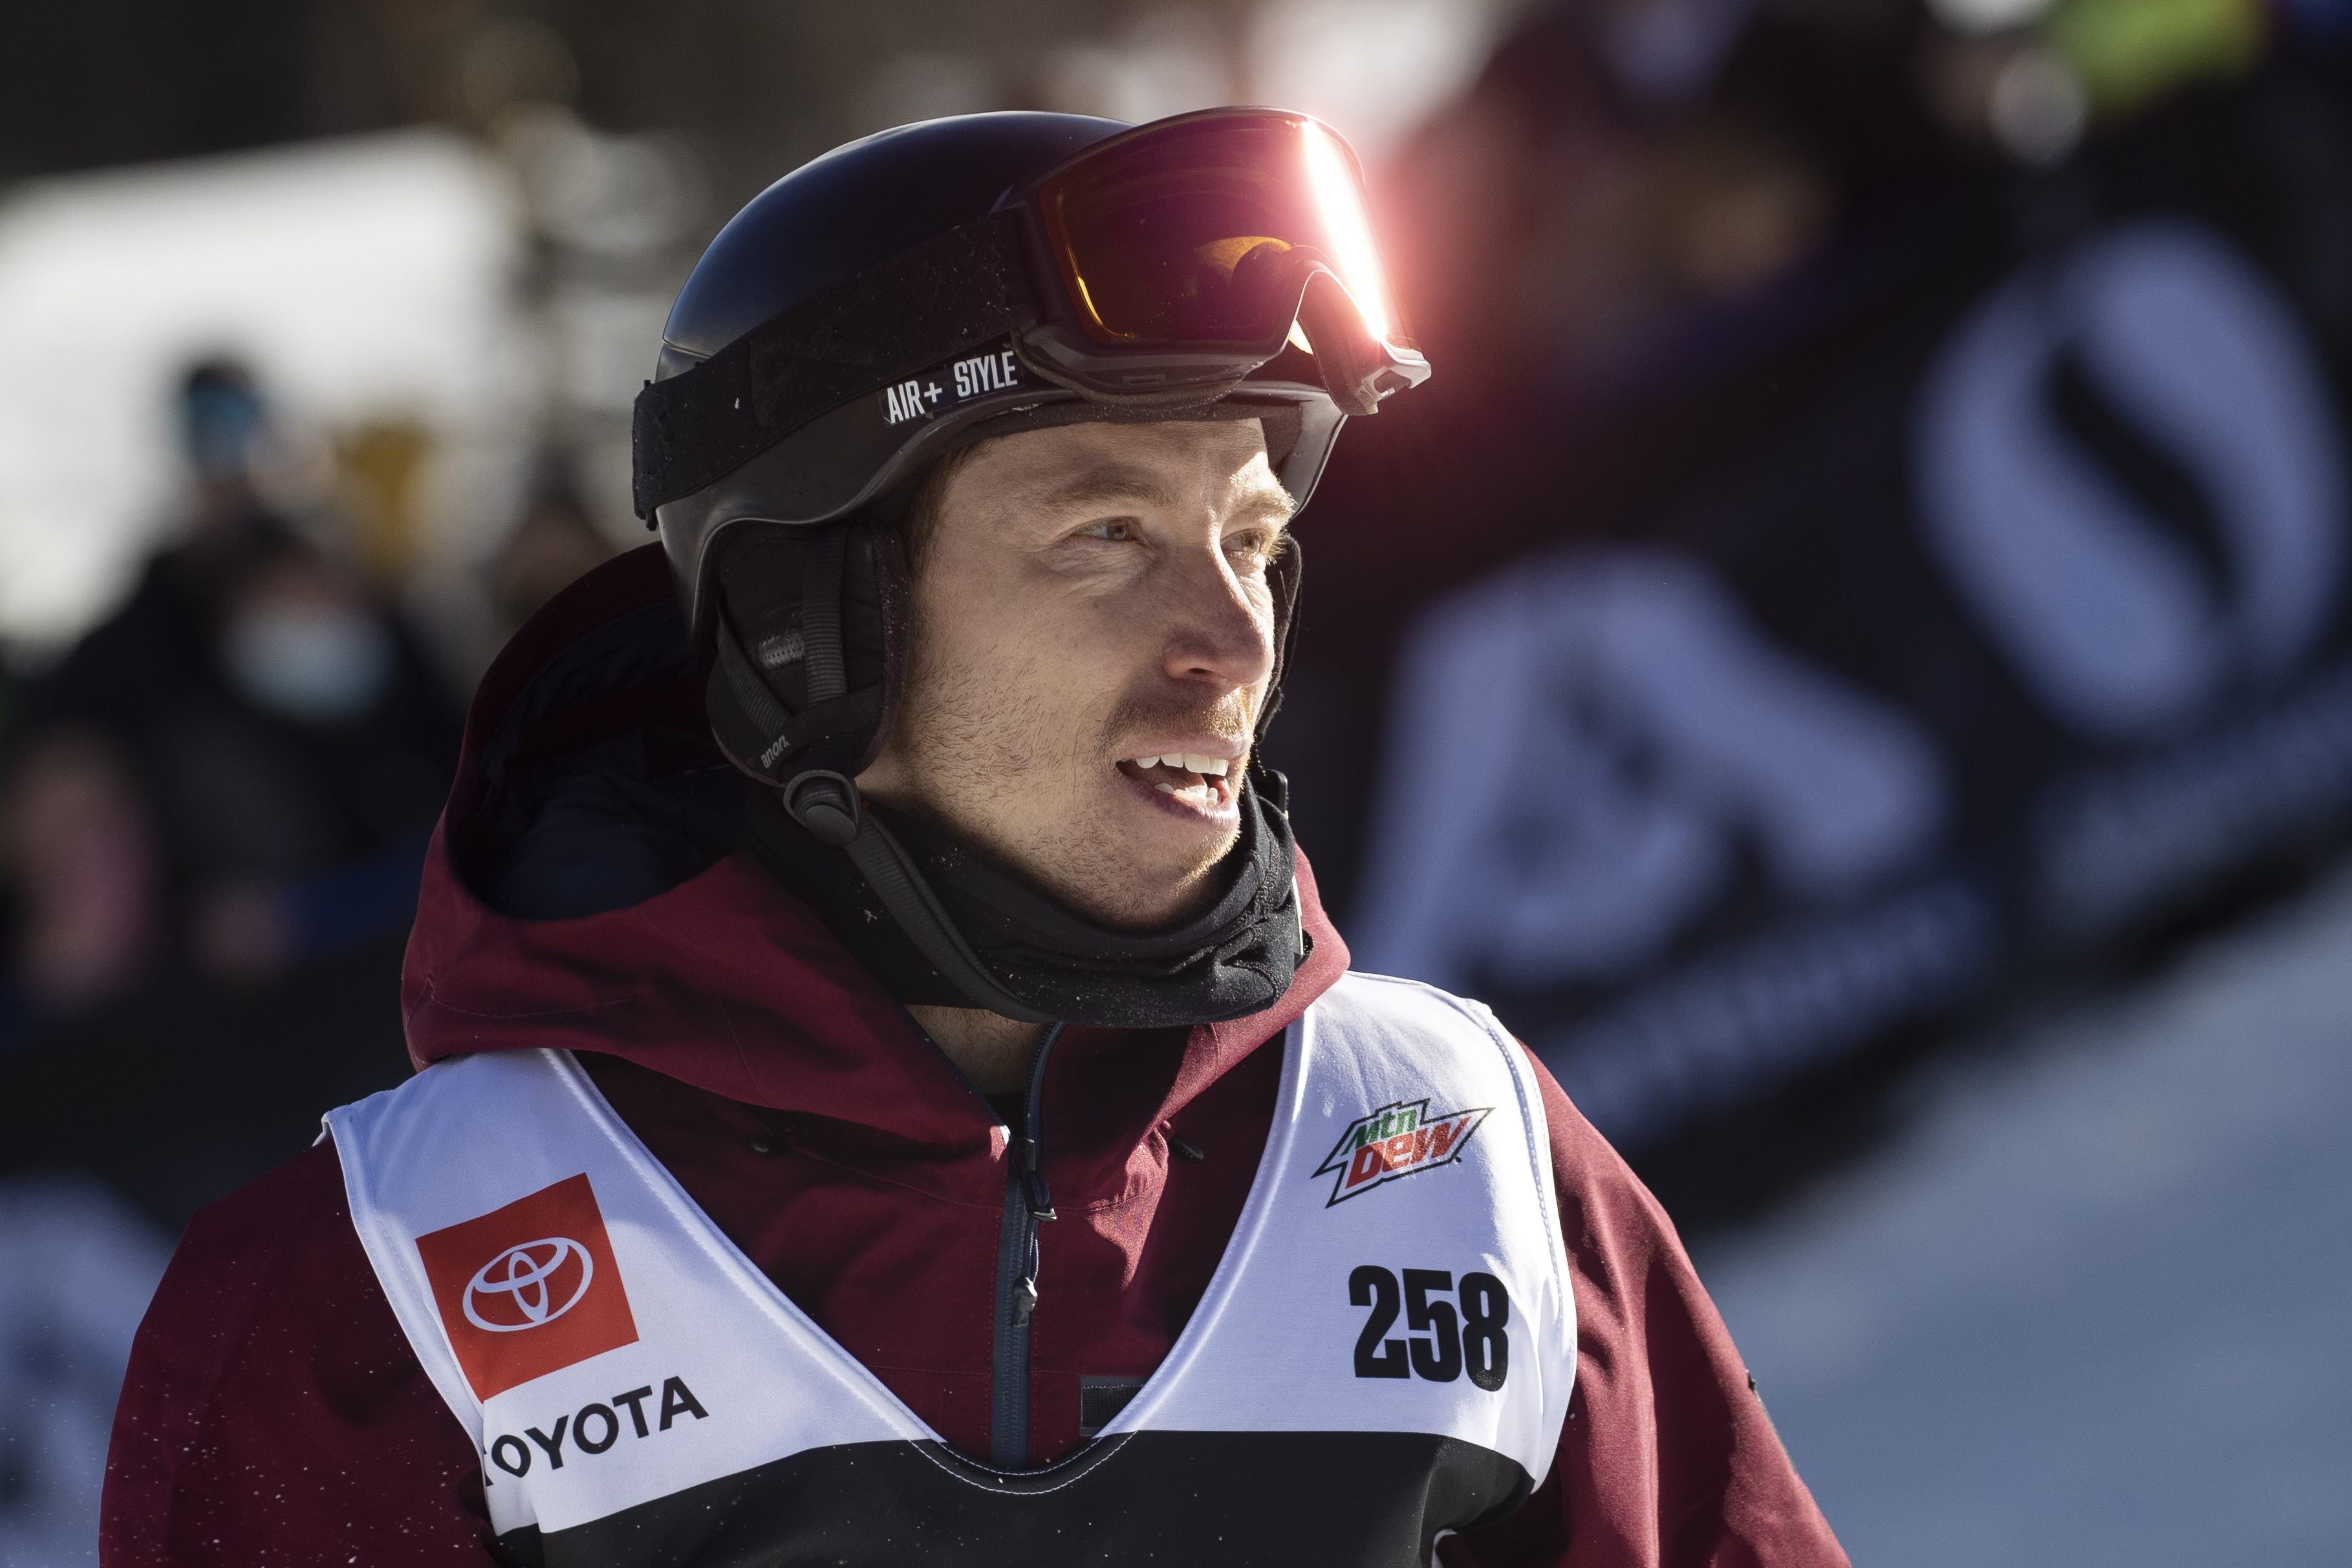 Beijing 2022: Shaun White to Retire From Competitive Snowboarding